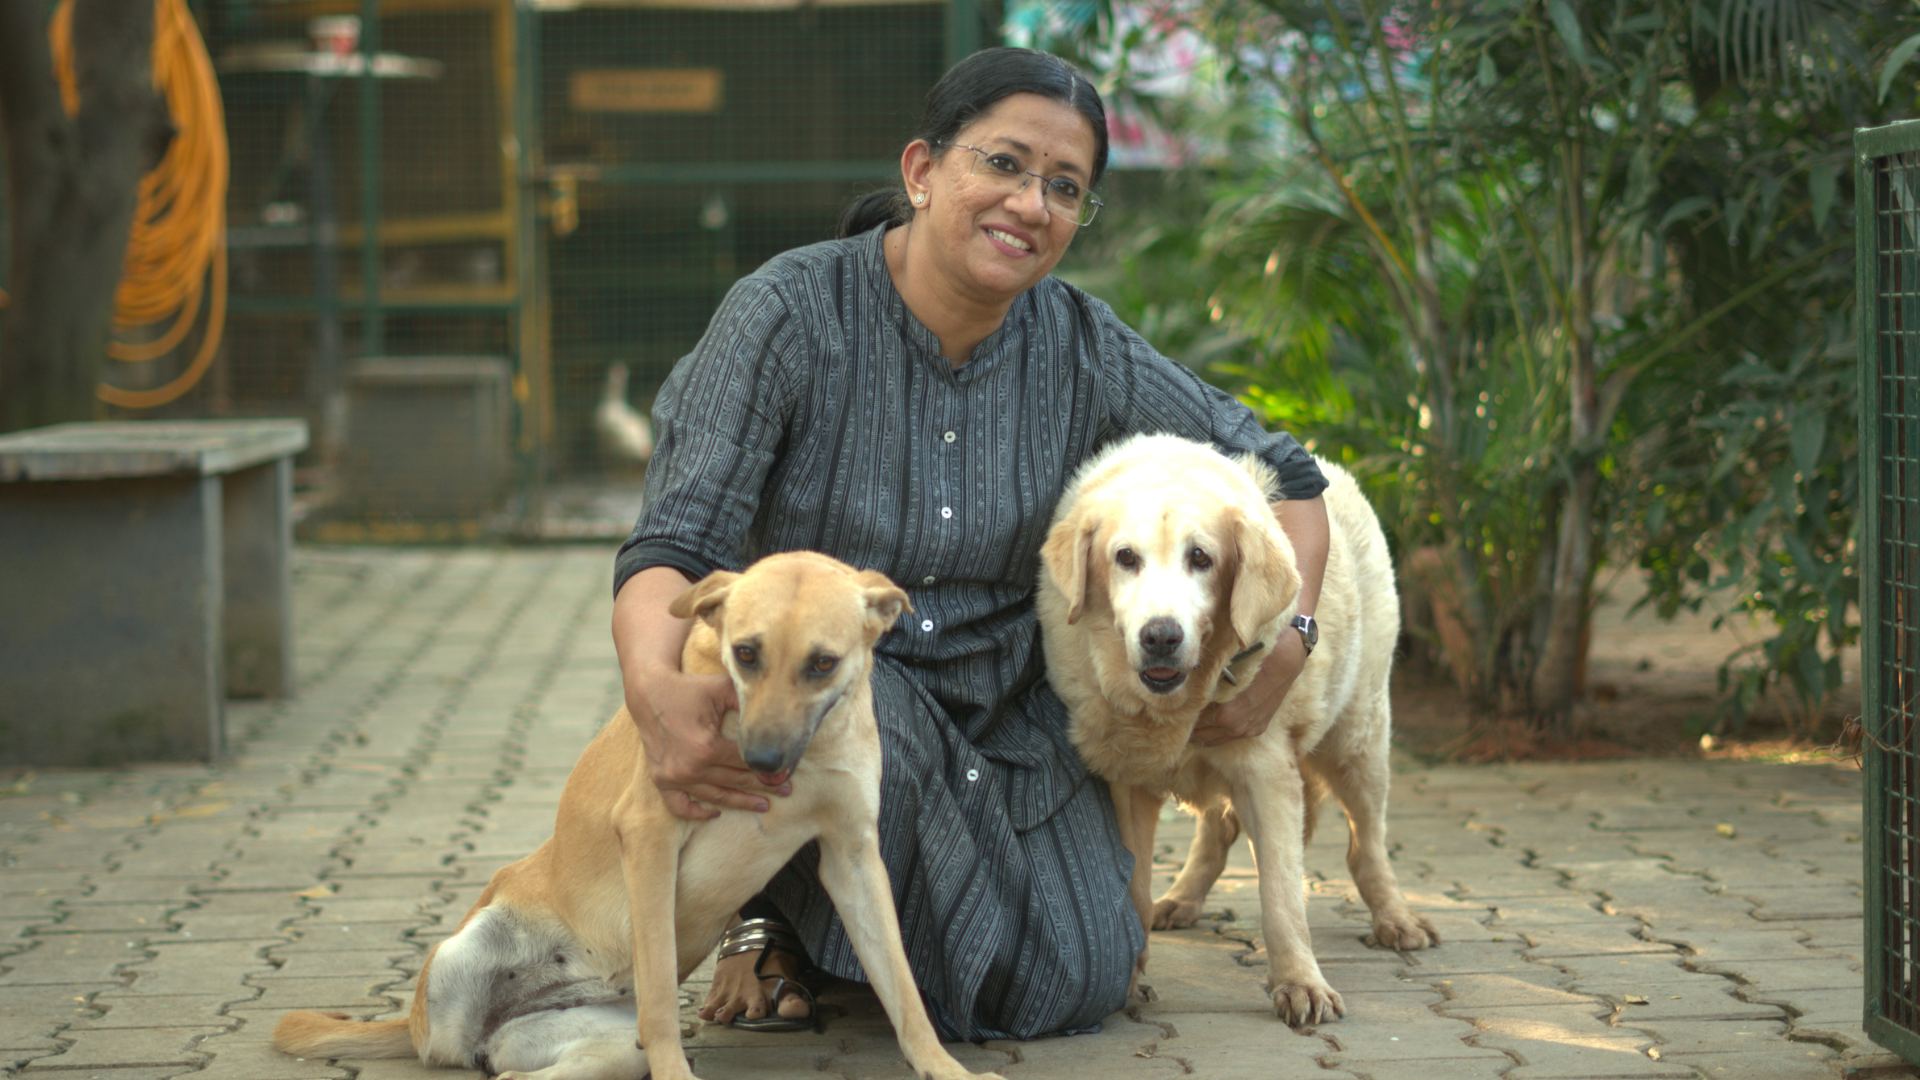 How CARE helps animals in Bangalore